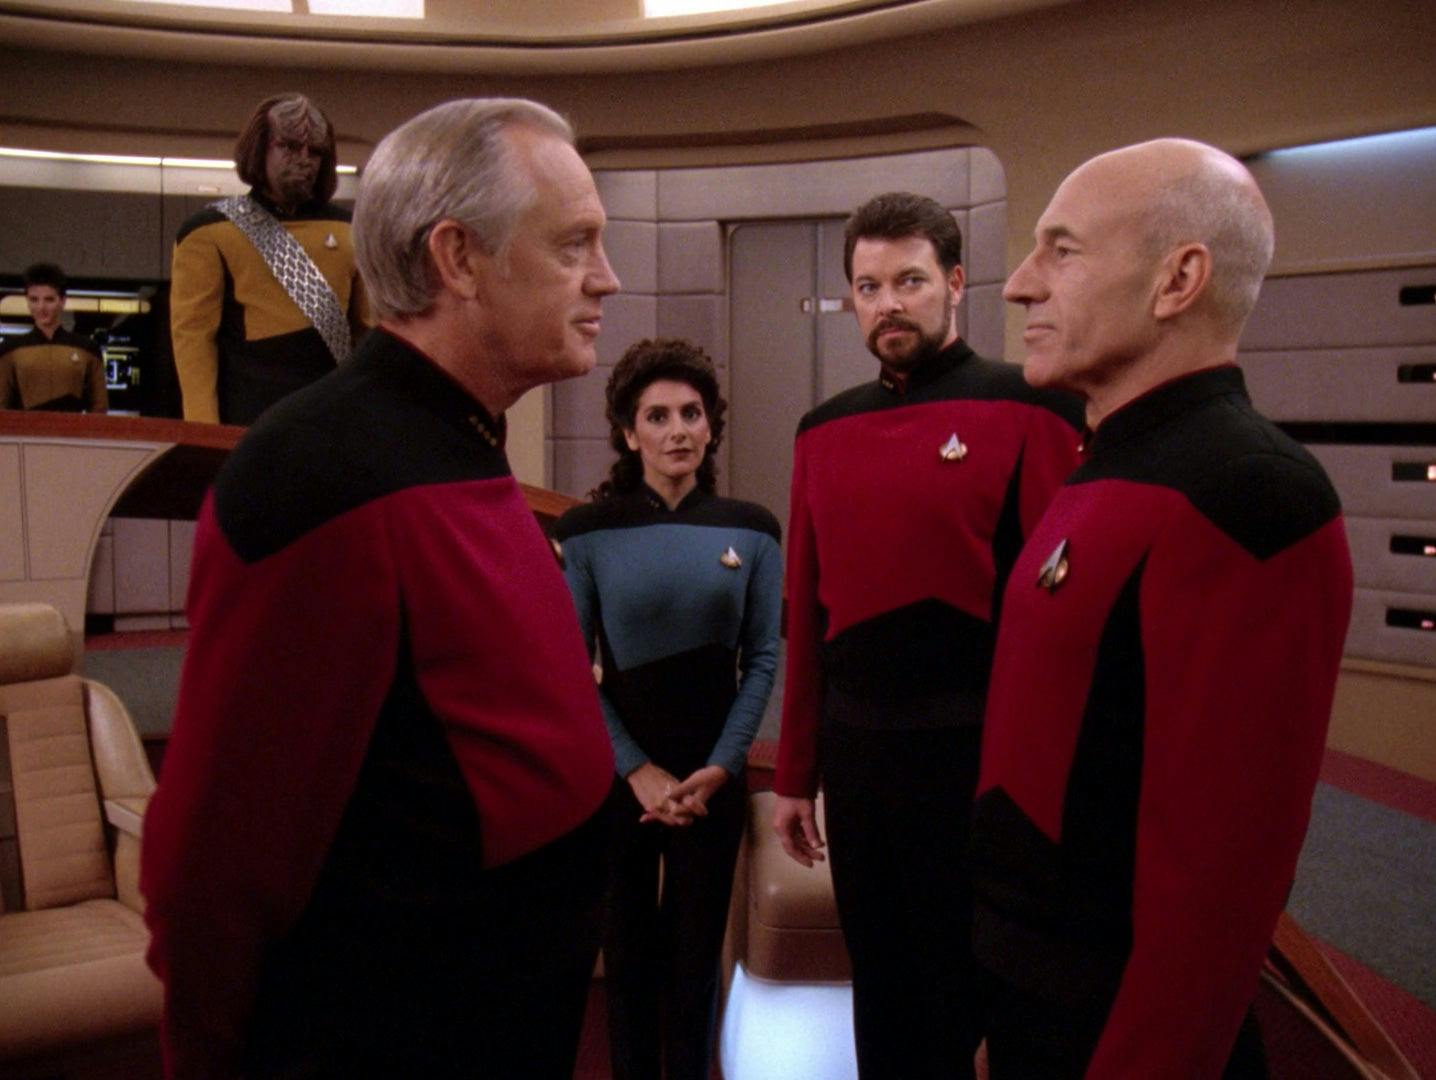 On the Bridge of the Enterprise, Jellico and Picard stand face to face as Troi and Riker look at them on Star Trek: The Next Generation